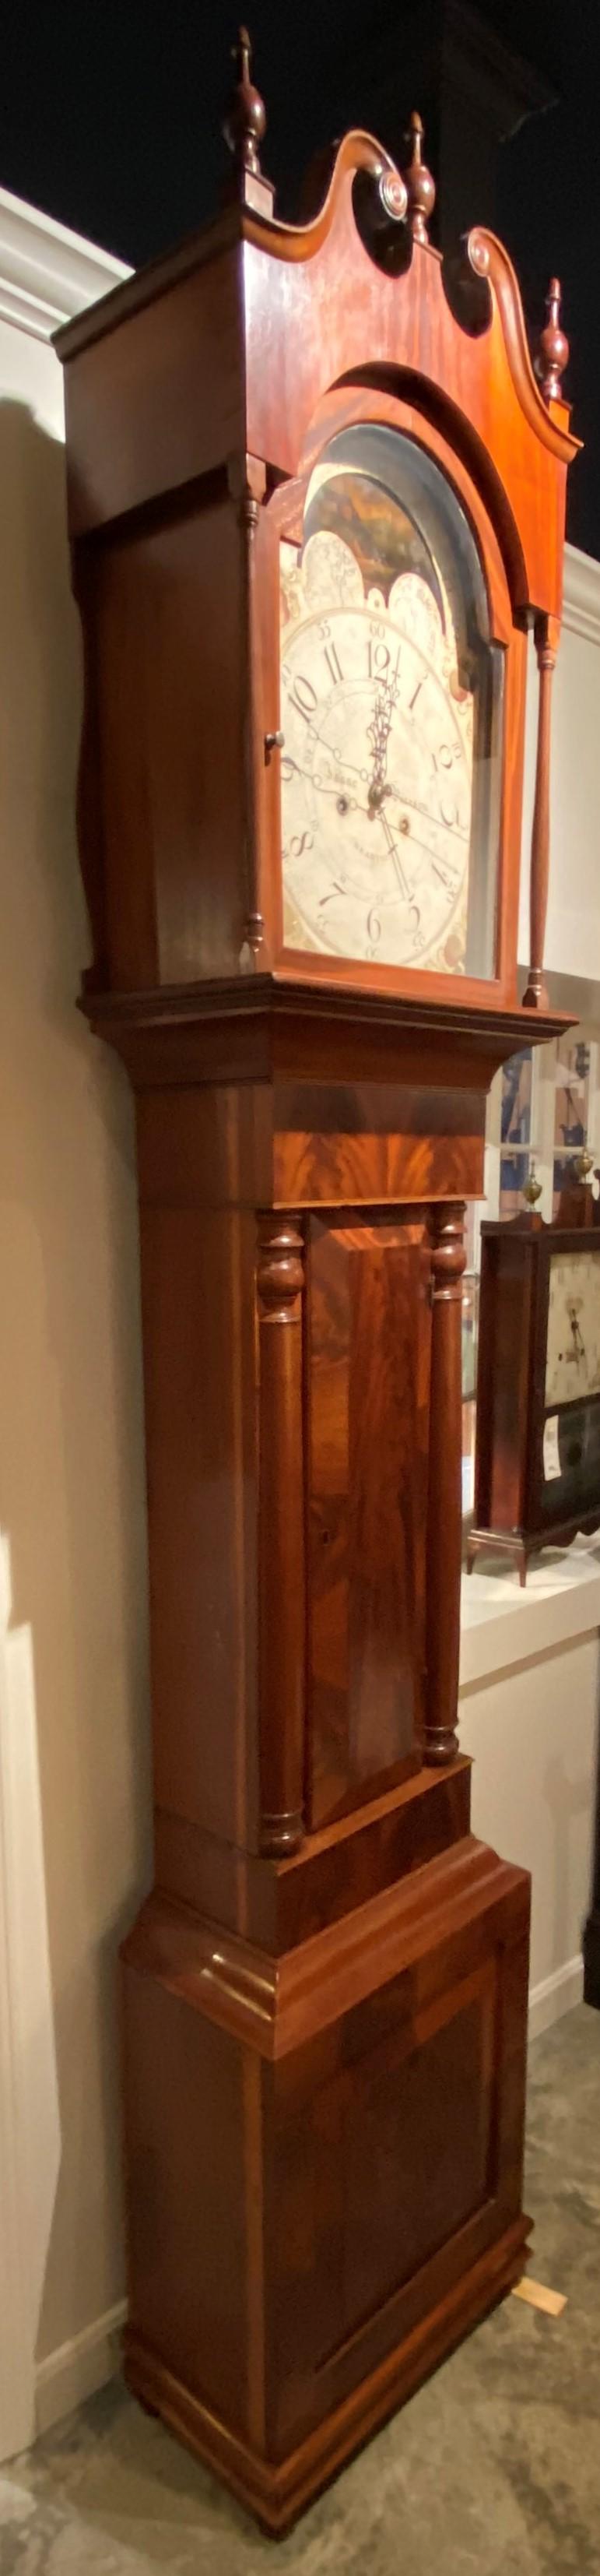 Empire Isaac Pearson Reading PA Walnut Tall Clock with Rare Jacob Kunsman Case, C 1845 For Sale